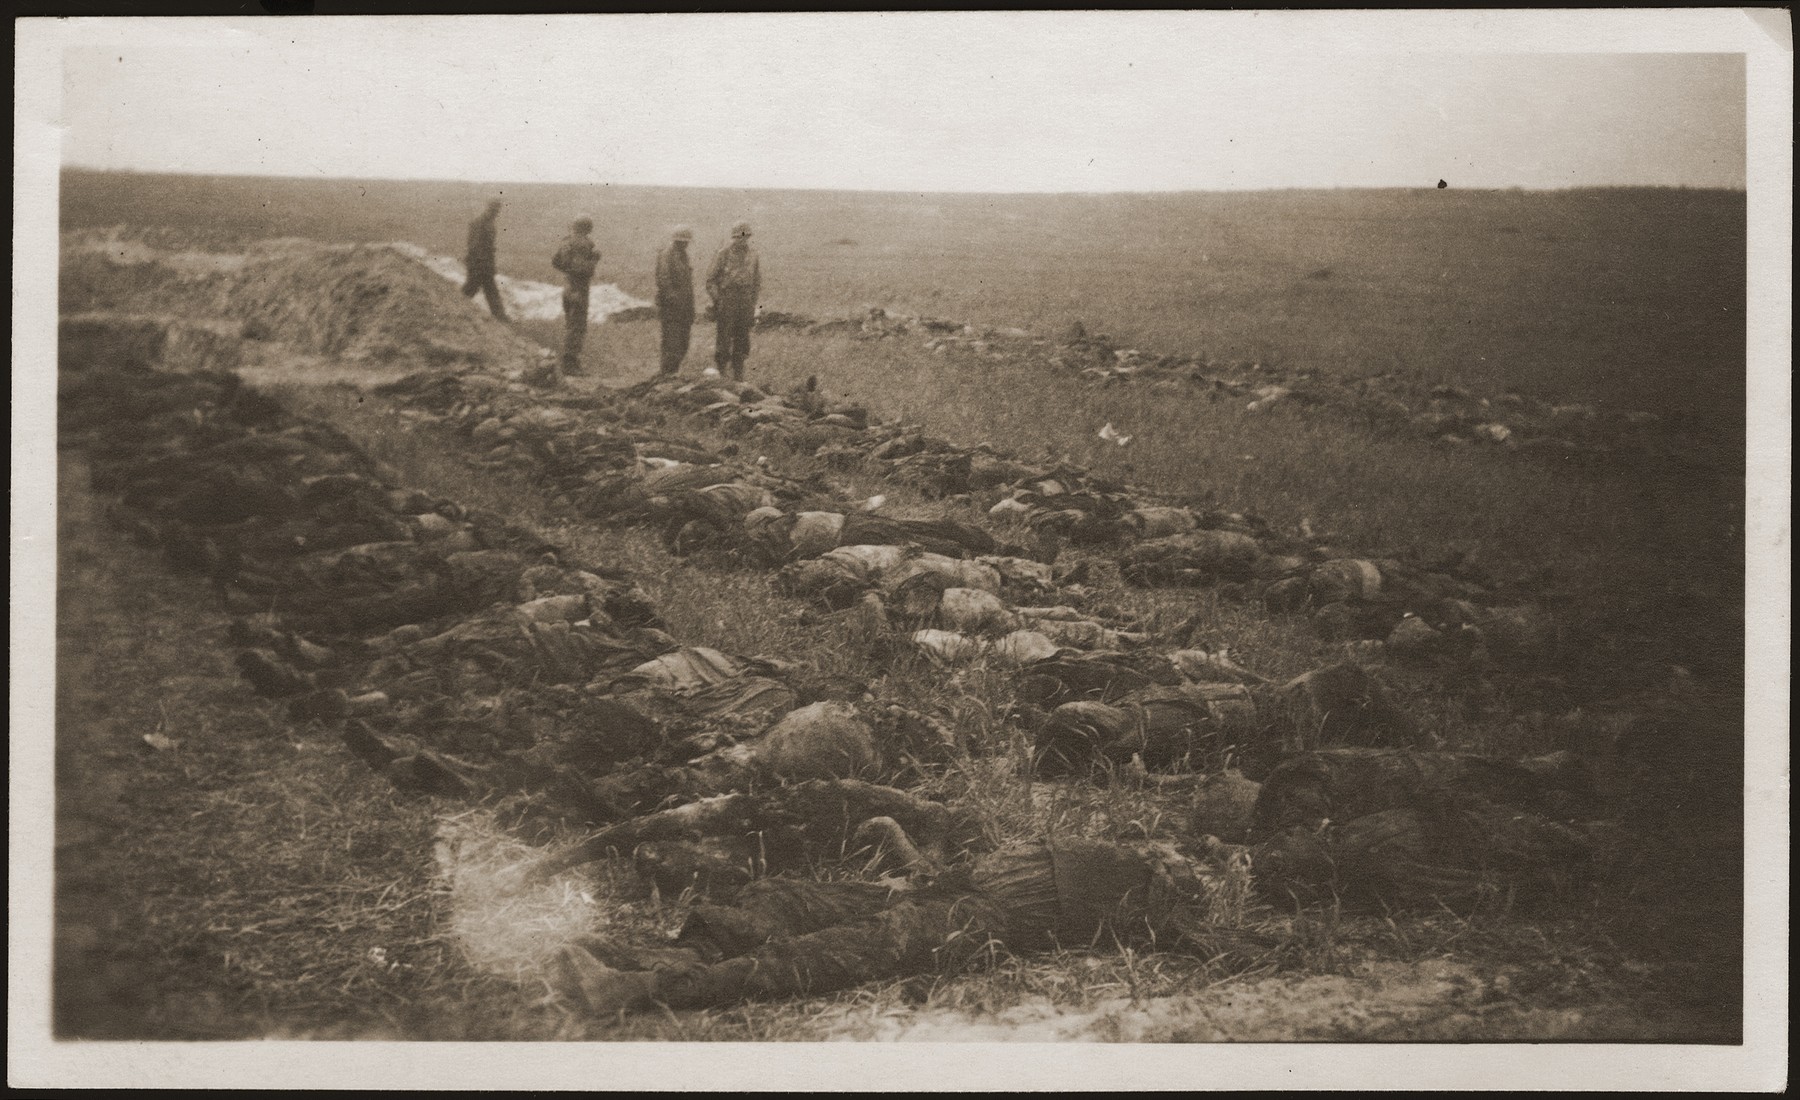 American soldiers stand among the corpses of concentration camp prisoners killed by the SS in a barn just outside of Gardelegen, which have been laid out for burial.